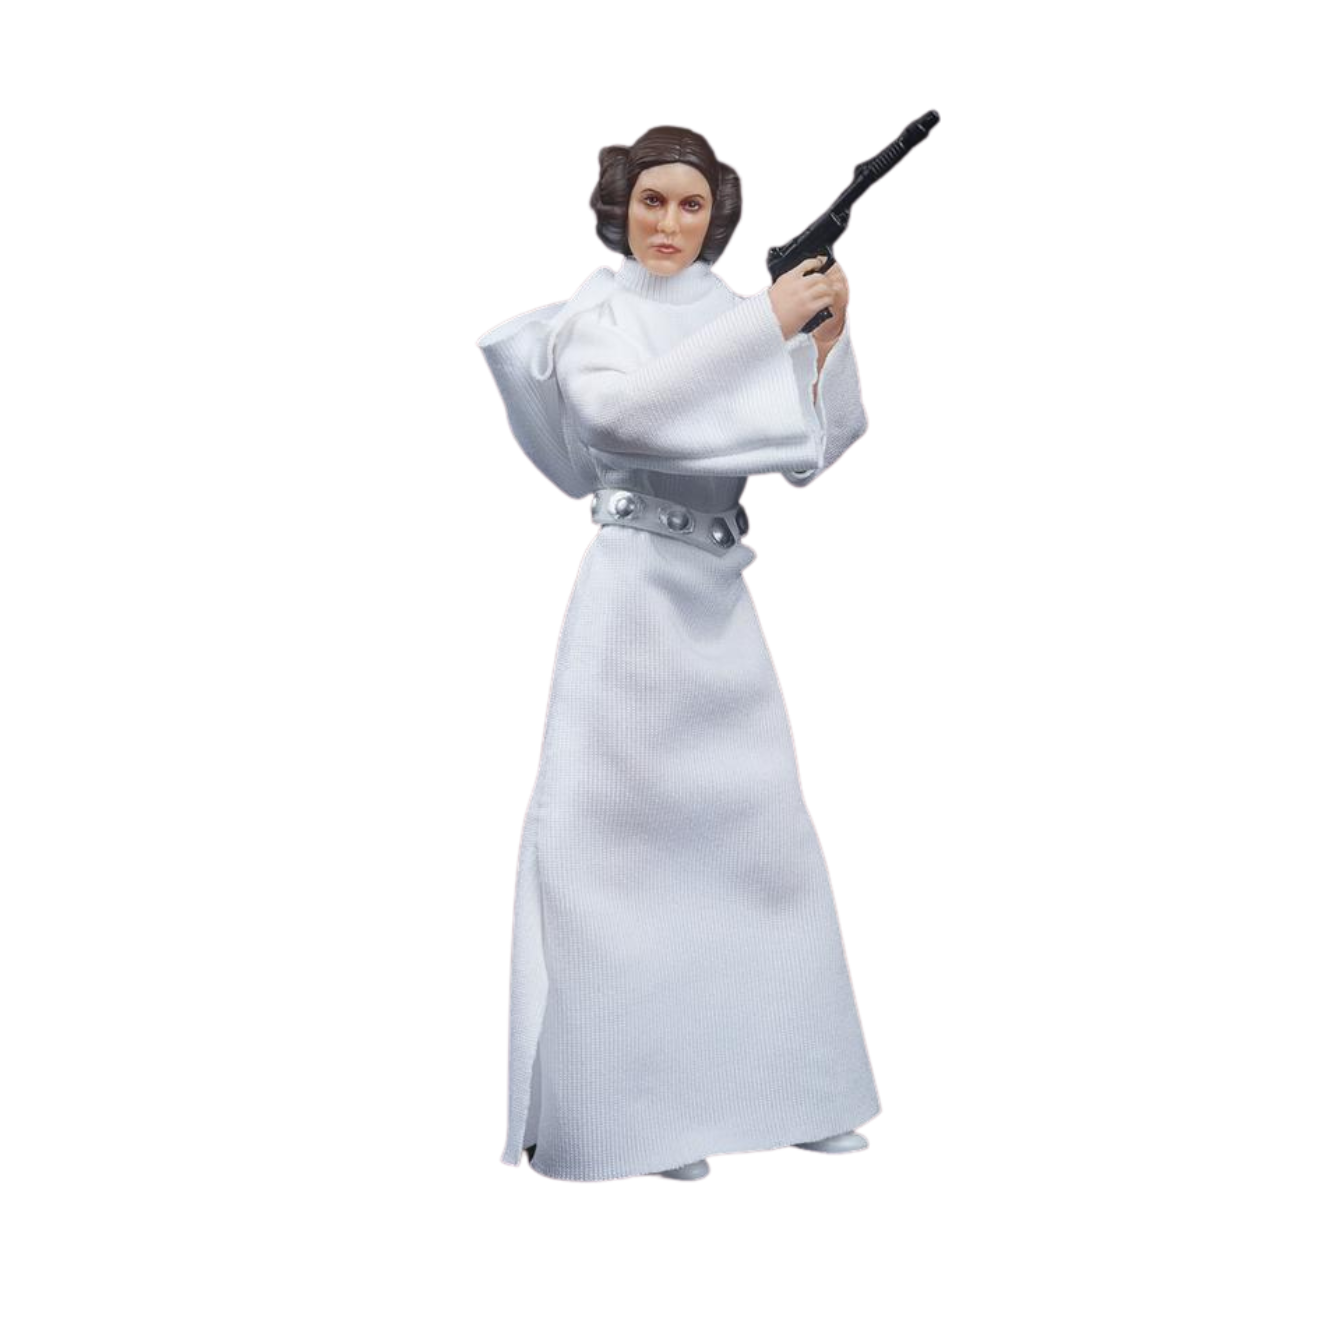 Star Wars The Black Series Archive A New Hope Princess Leia 6 Inch Action Figure